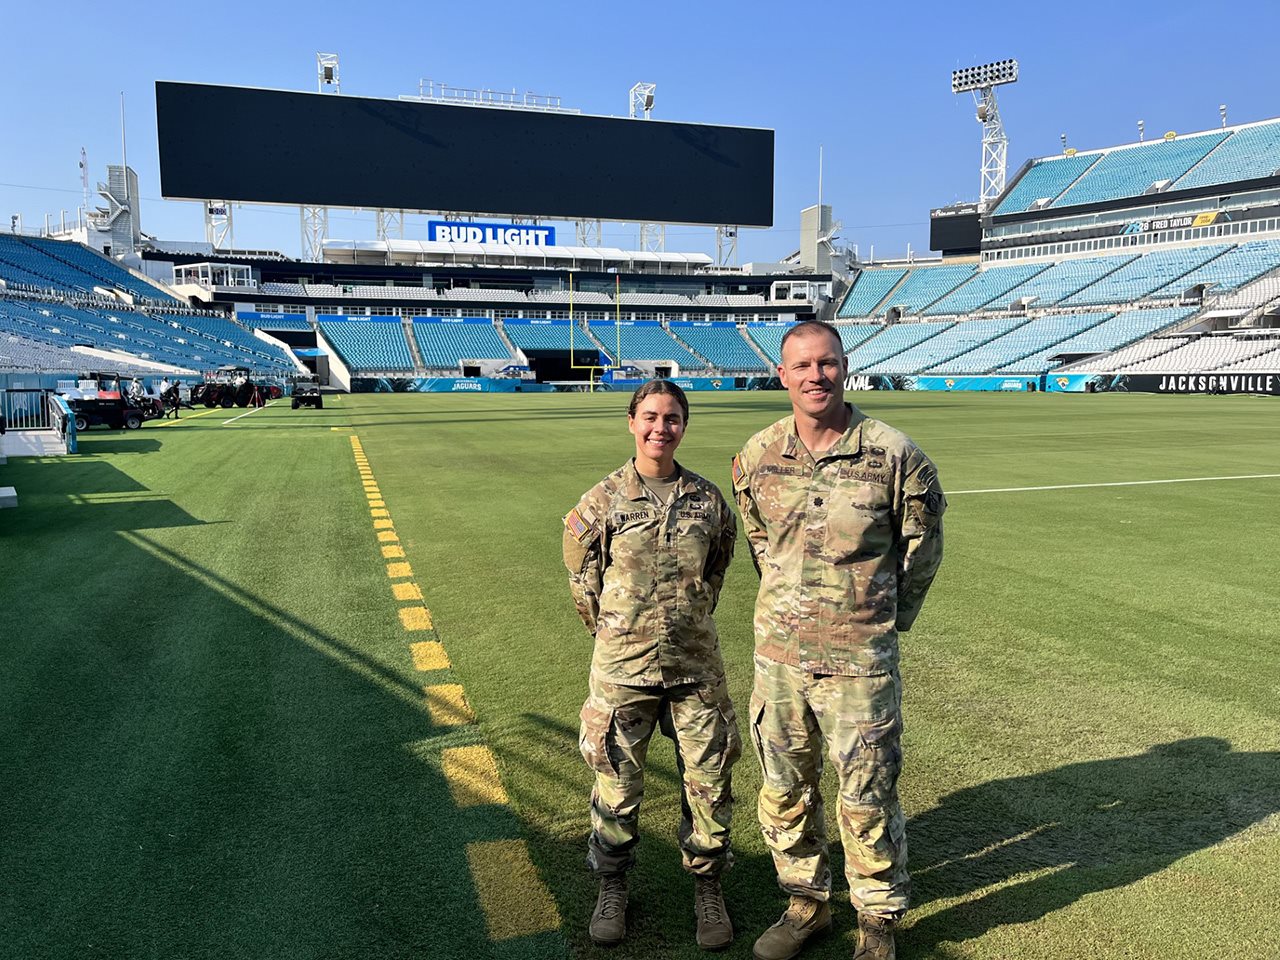 Two U.S. Army soldiers standing on the field in JAX Stadium